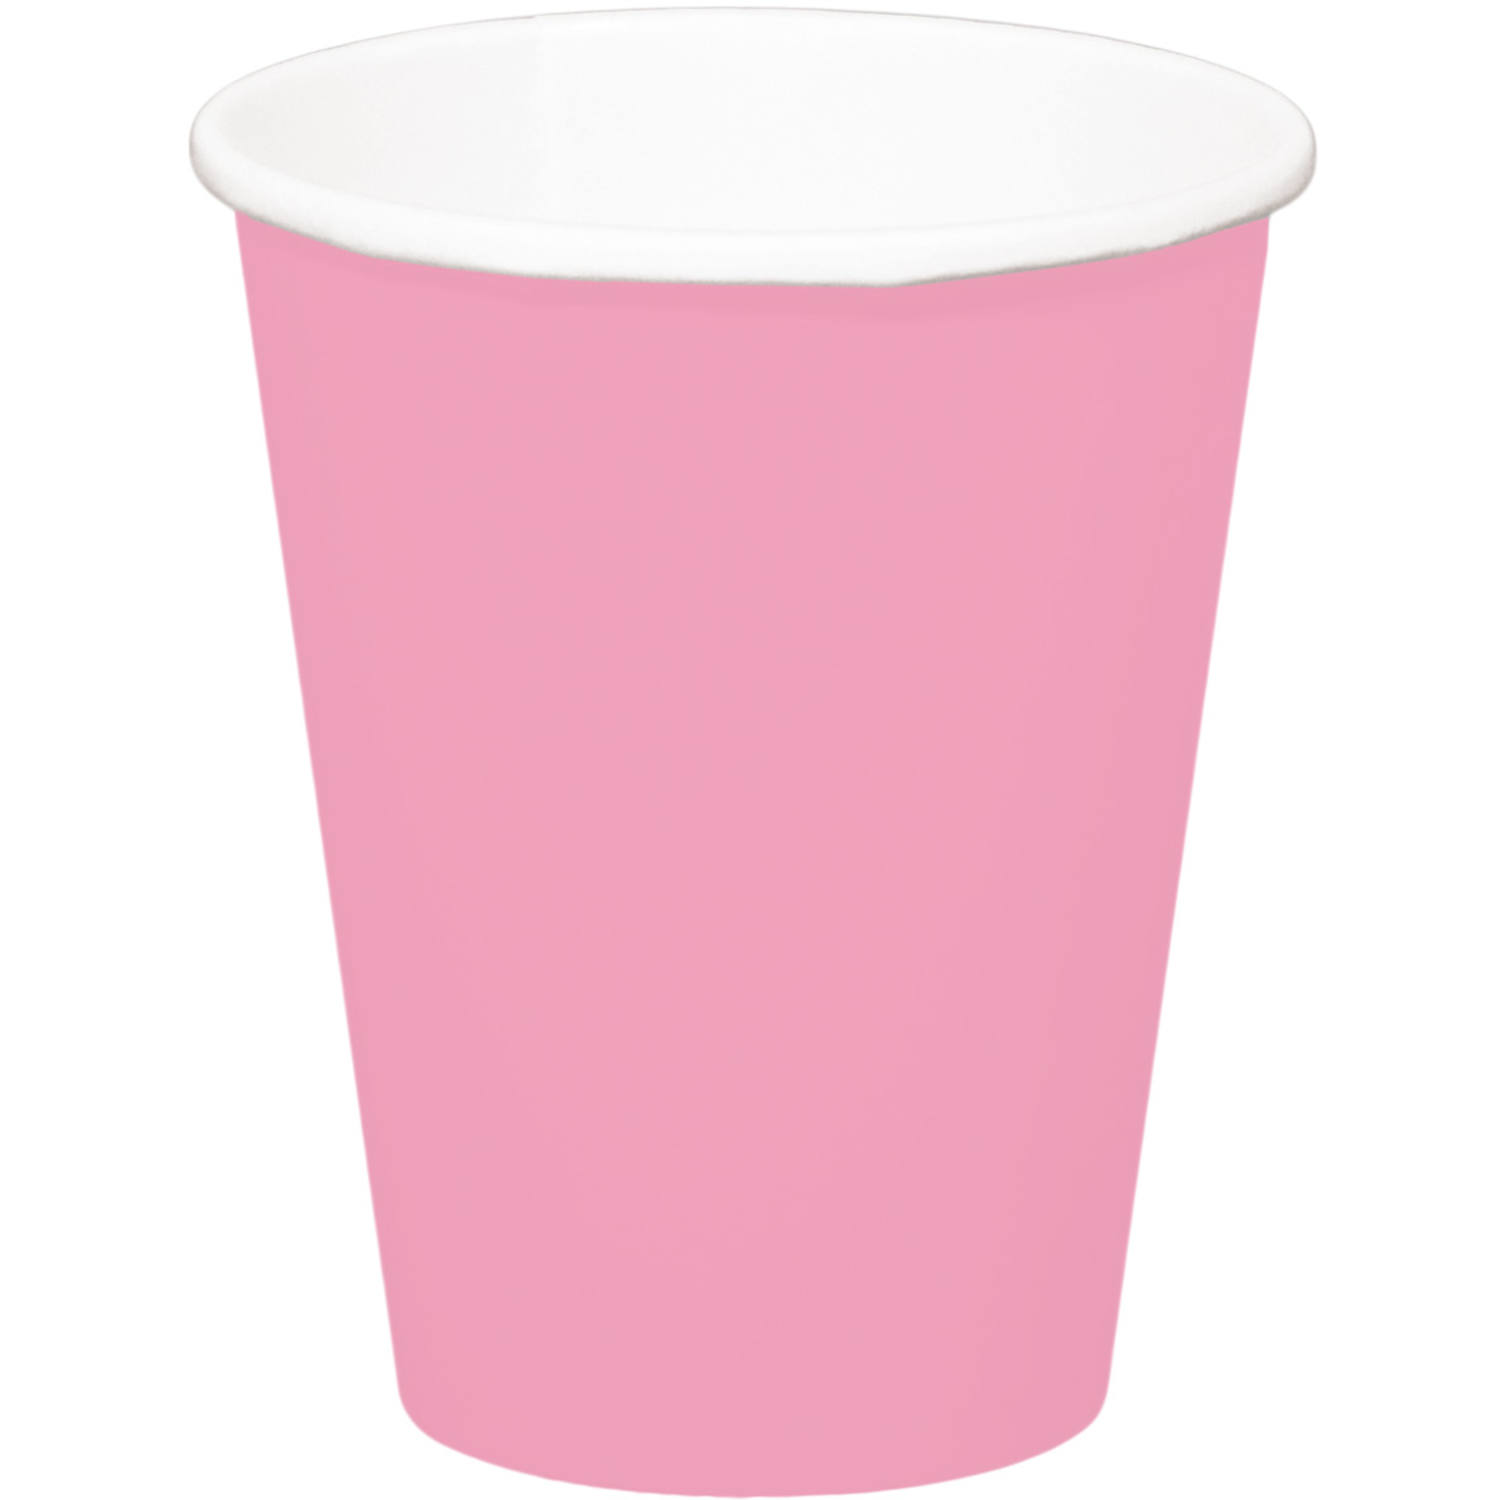 Baby Pink Disposable Cups 350 ml - 8 pieces 1